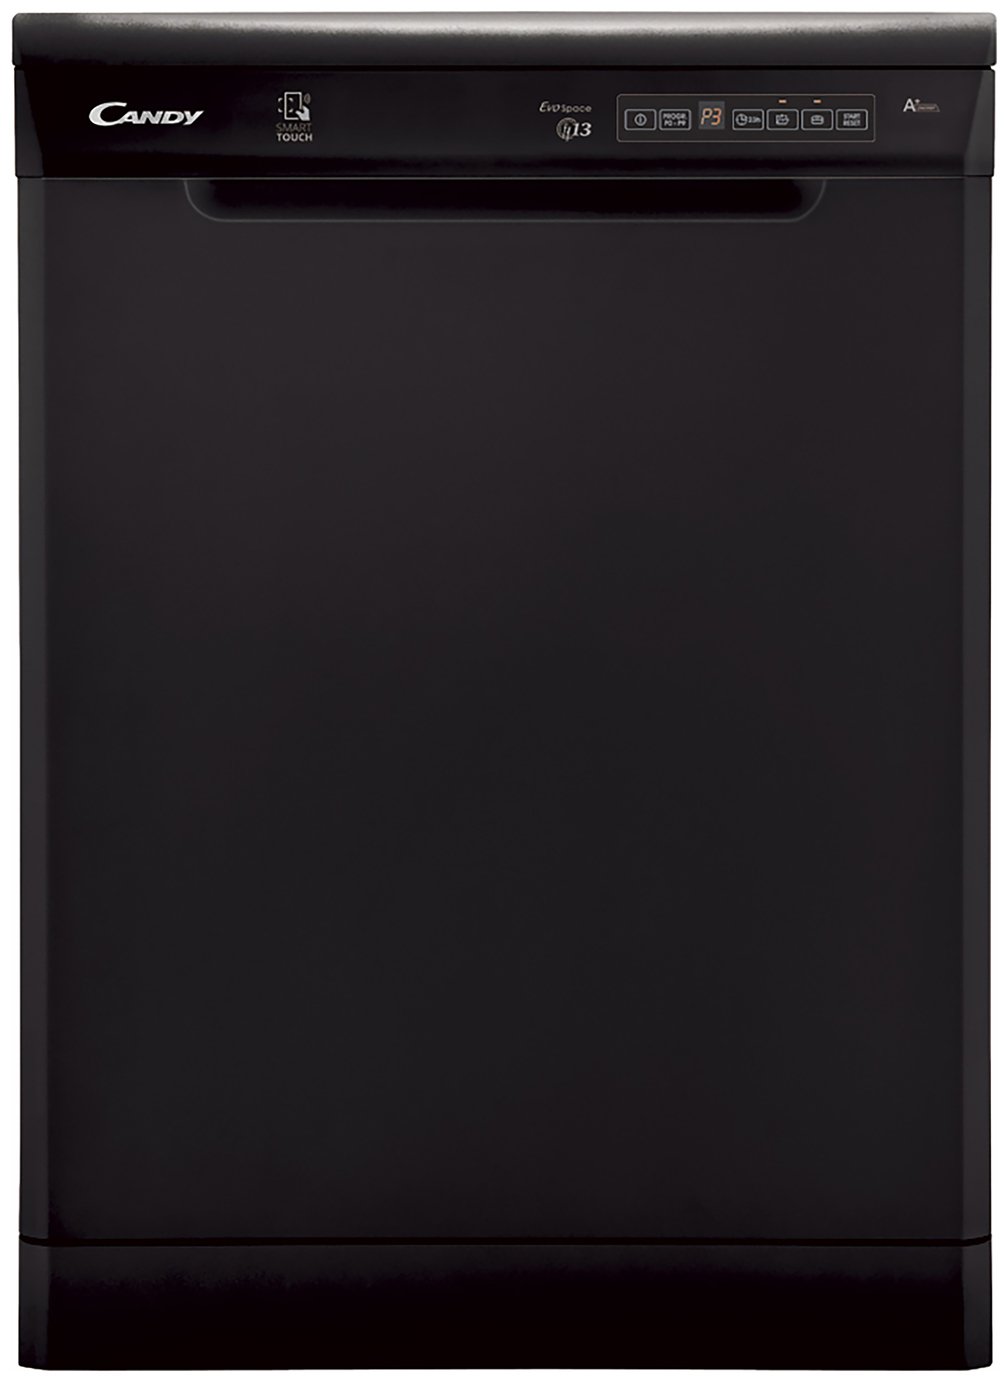 Candy CDP 1DS39B Full Size Dishwasher - Black